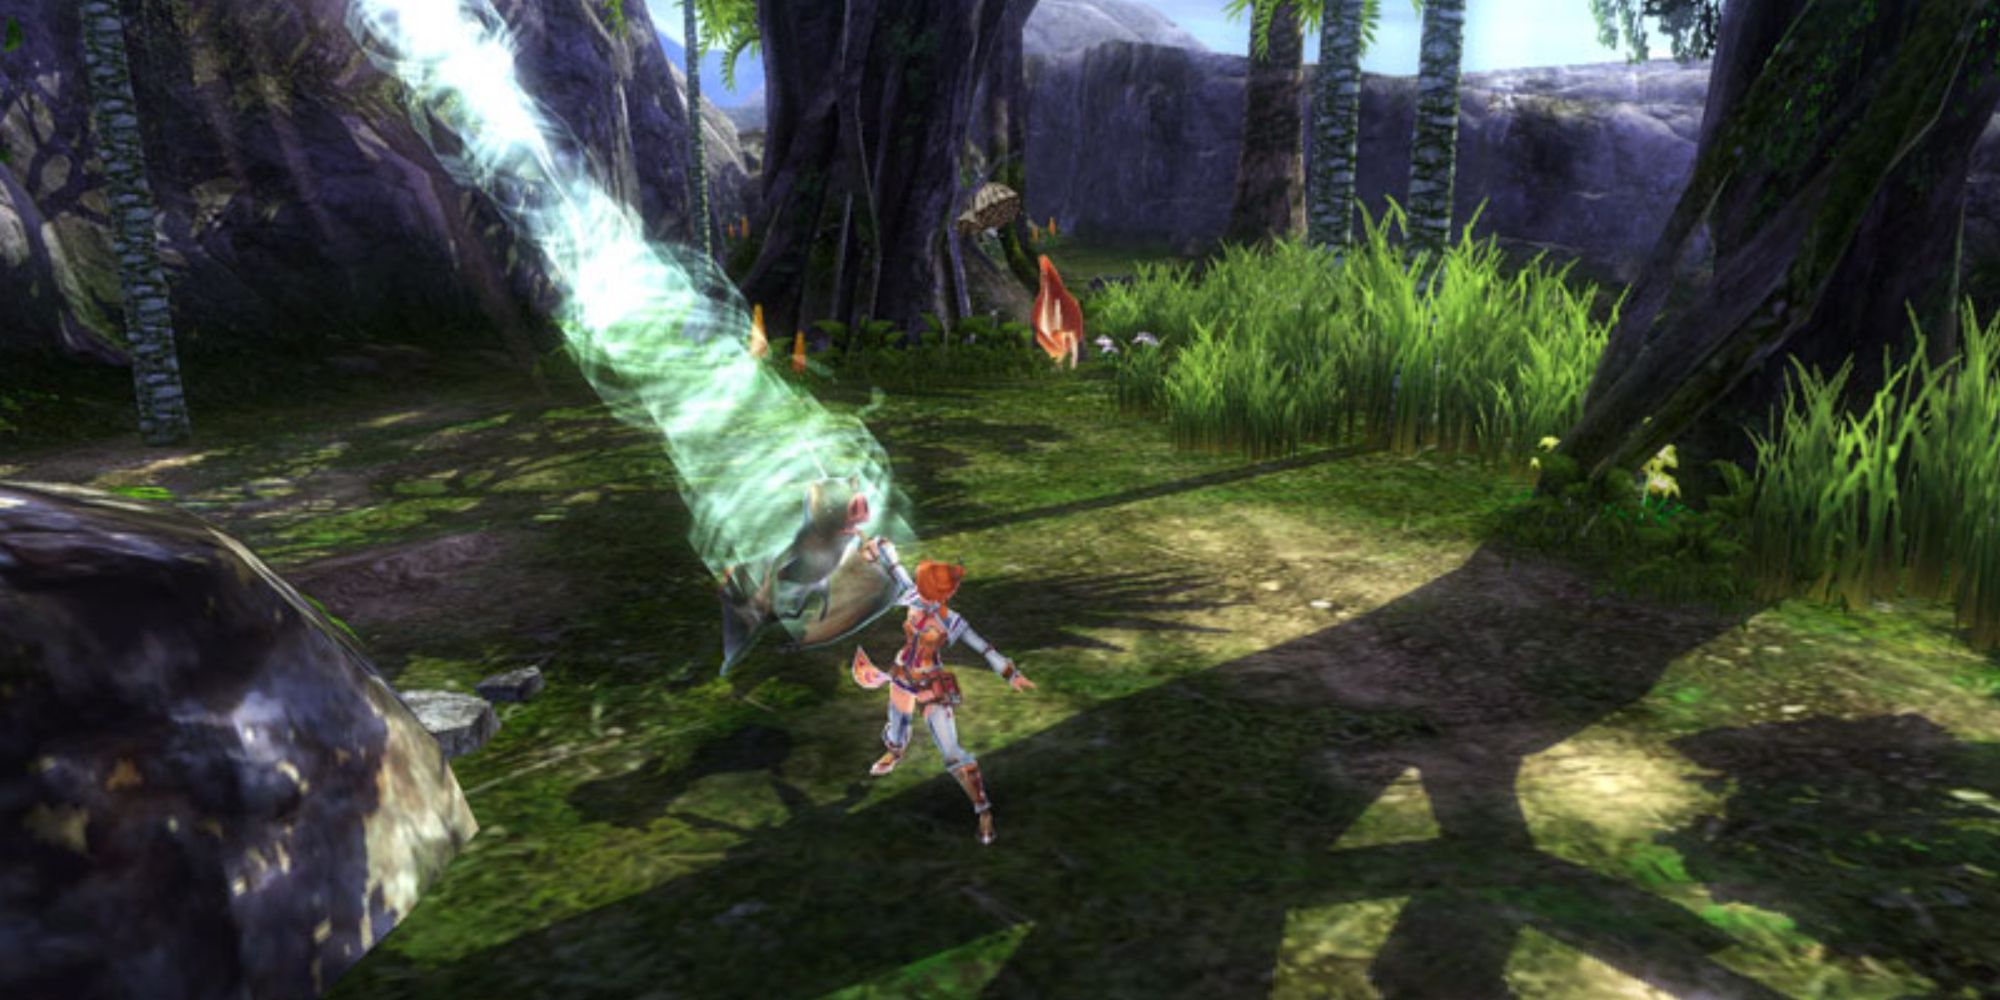 Laxia using a Piercing Attack on an Air-based Enemy in Ys 8: Lacrimosa of Dana